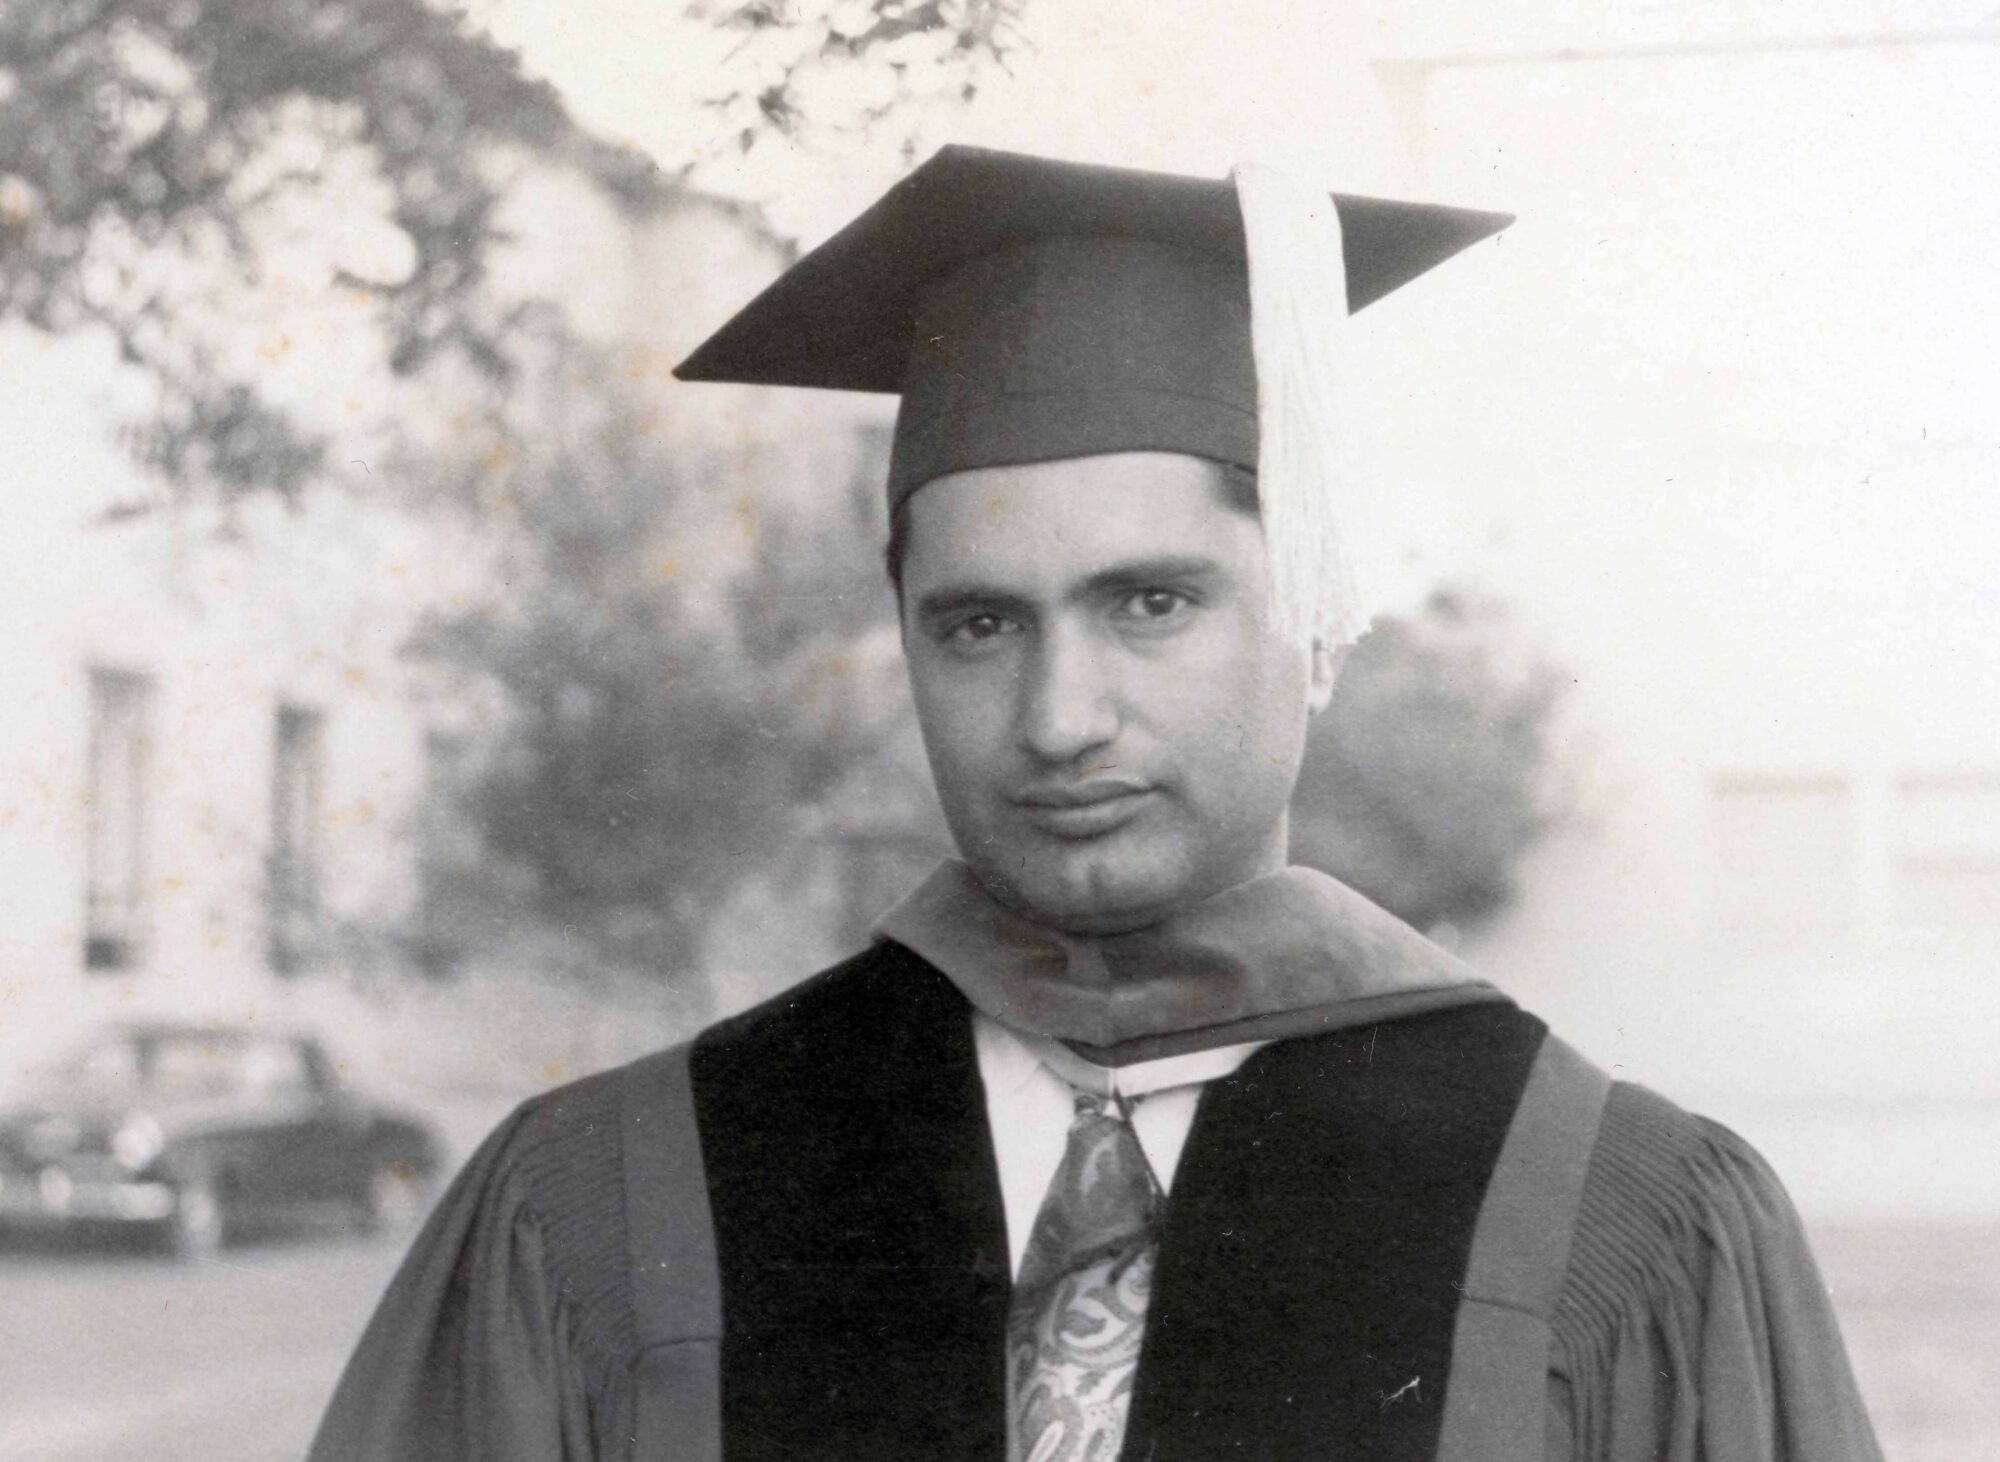 Black & white photo of a man in commencement gown